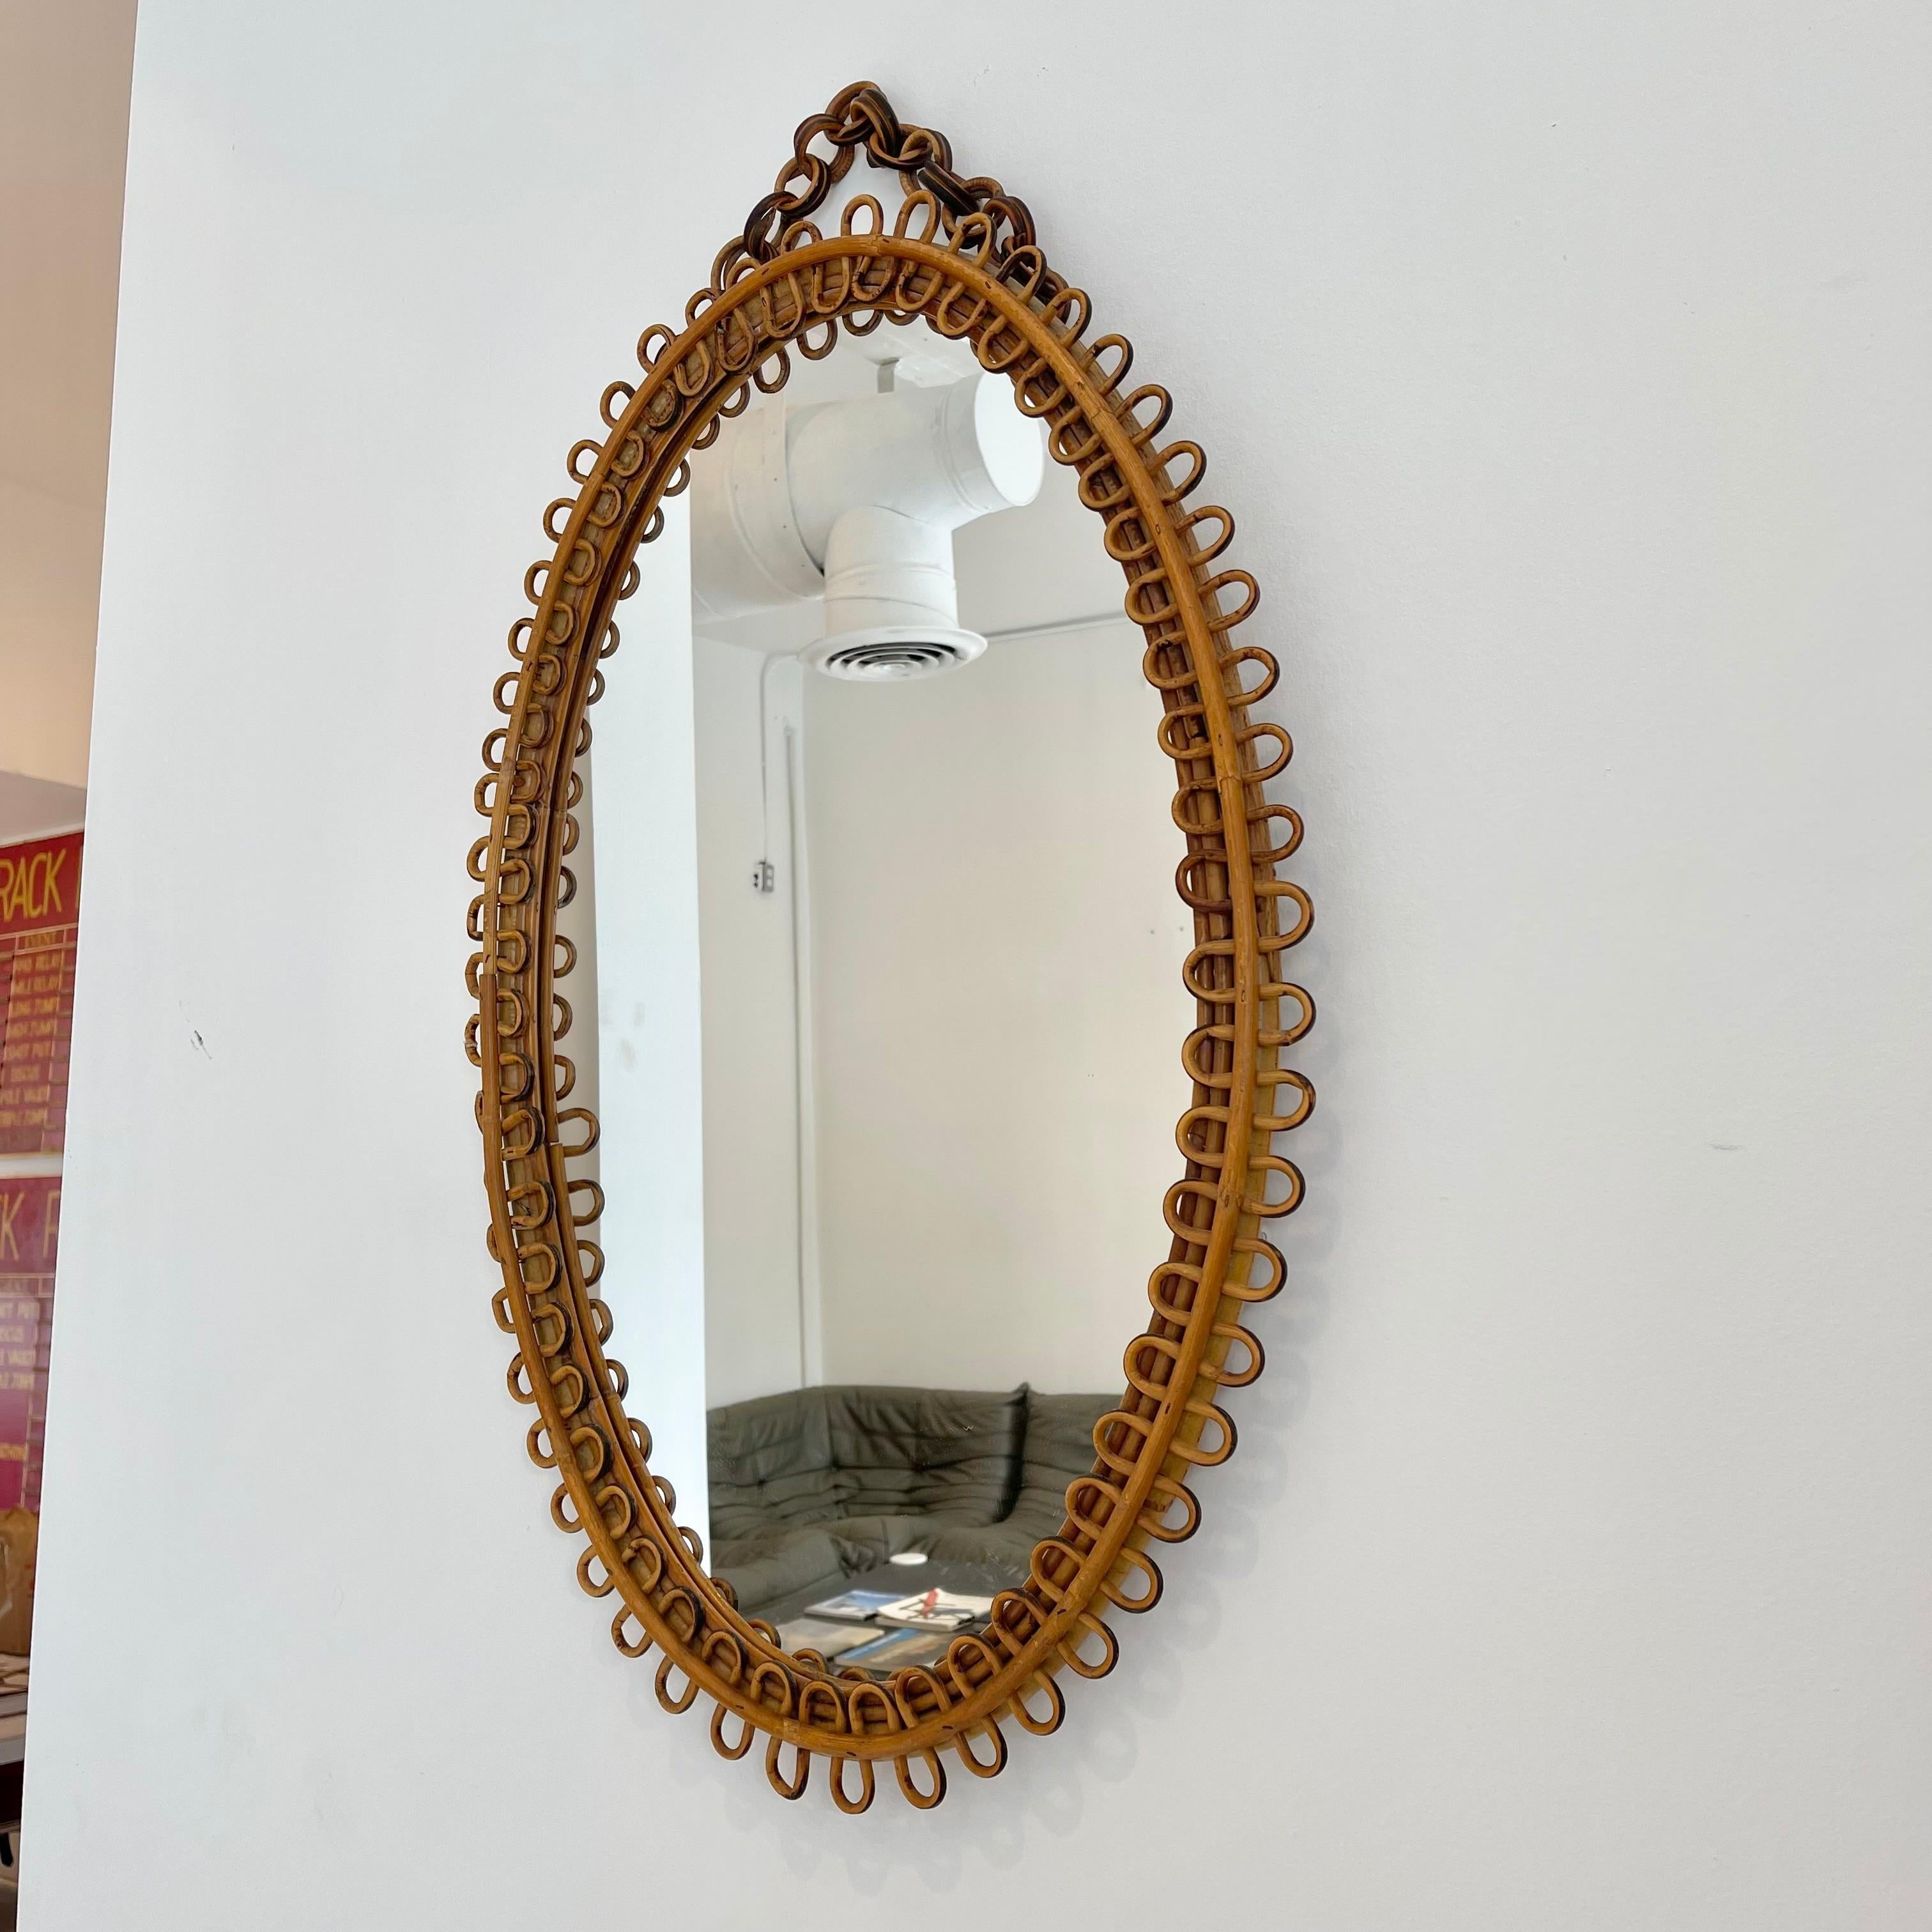 Gorgeous oval rattan hanging mirror from Italy, circa 1950. A single reed of rattan which bends in a bow-like manor adorns the face of the frame. This reed is fastened to a solid rattan frame. Mirror hangs from a chain of wood rings. Good vintage